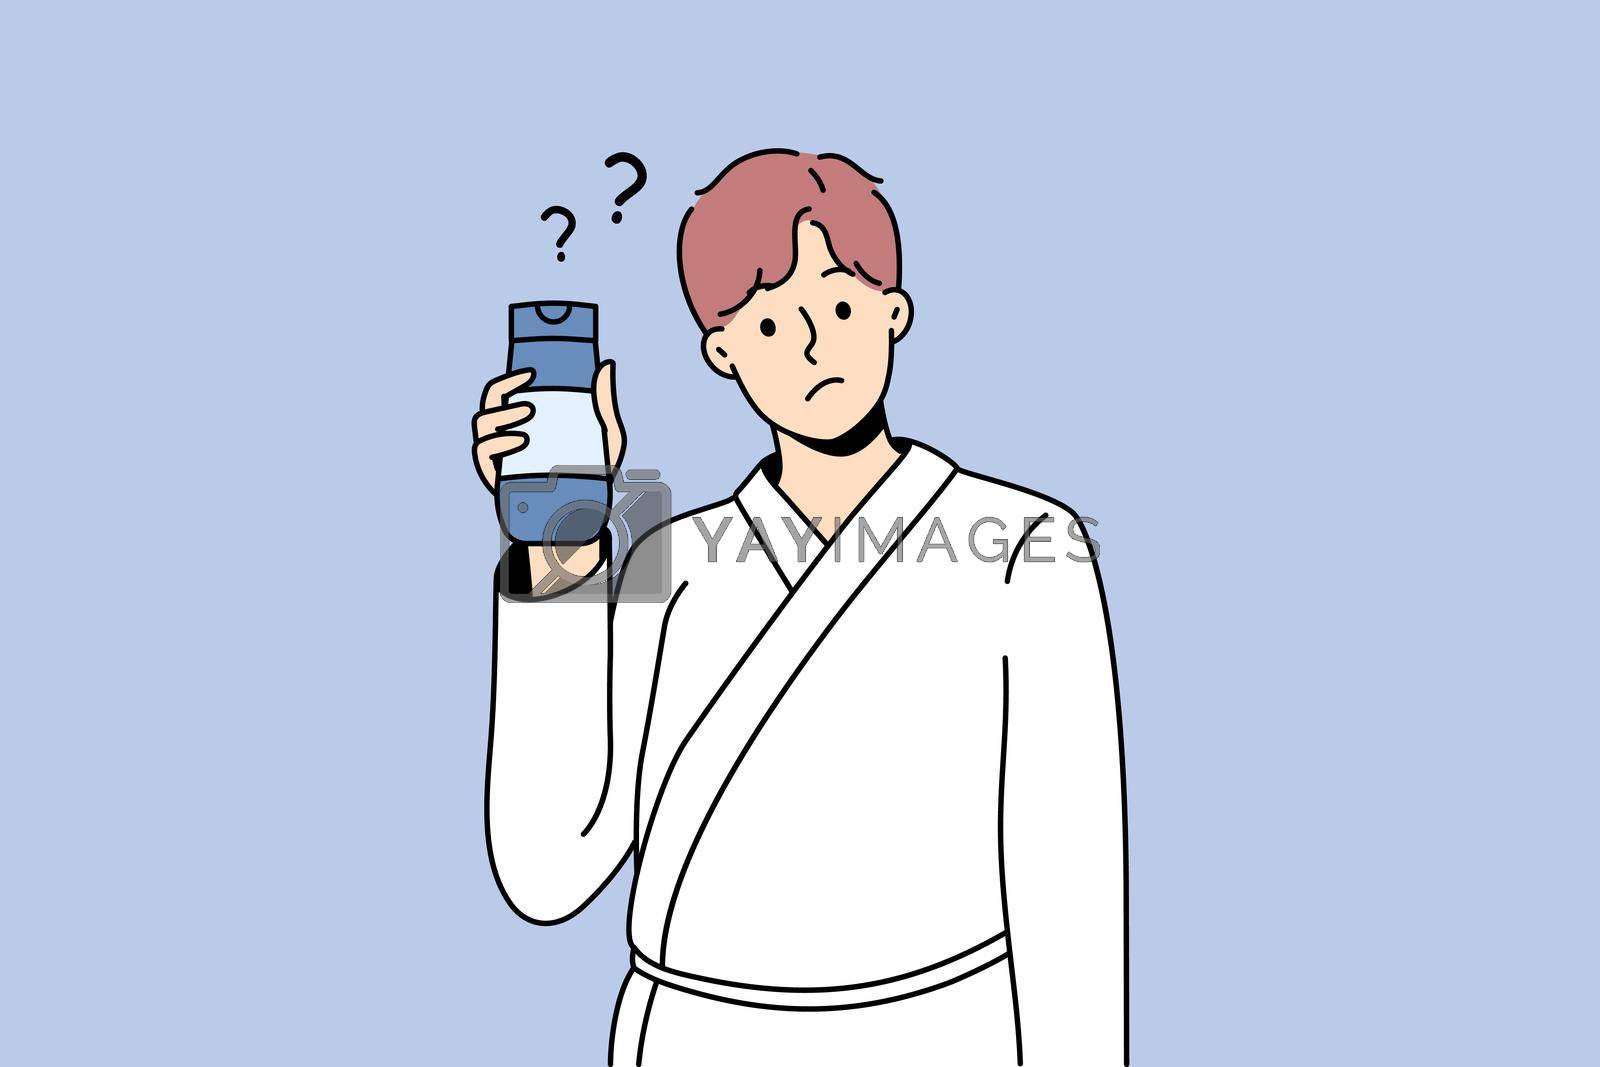 Cosmetics and treatments for men concept. Young man wearing bathtub standing cosmetic bottle in hands with question mark nearby vector illustration